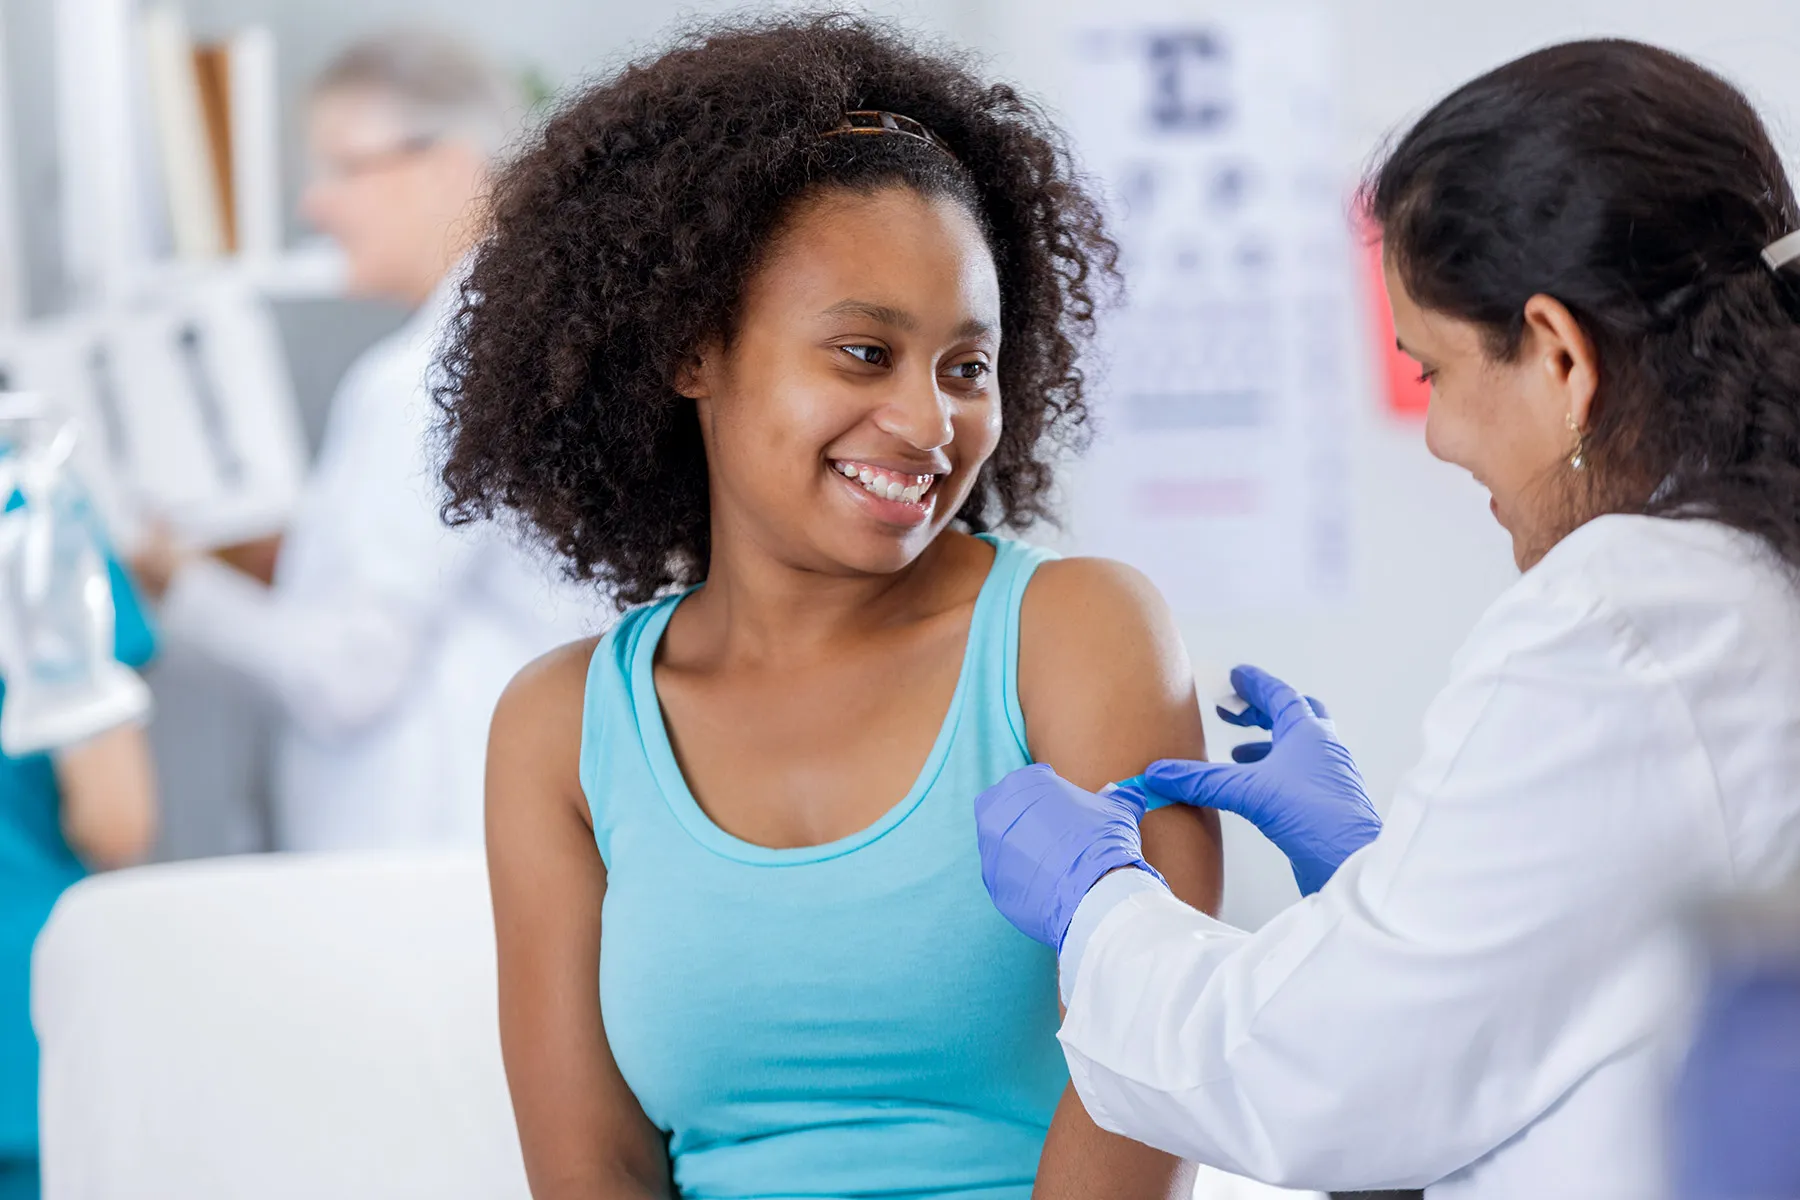 FDA Delays Decision on Moderna COVID Vaccine for Younger Teens